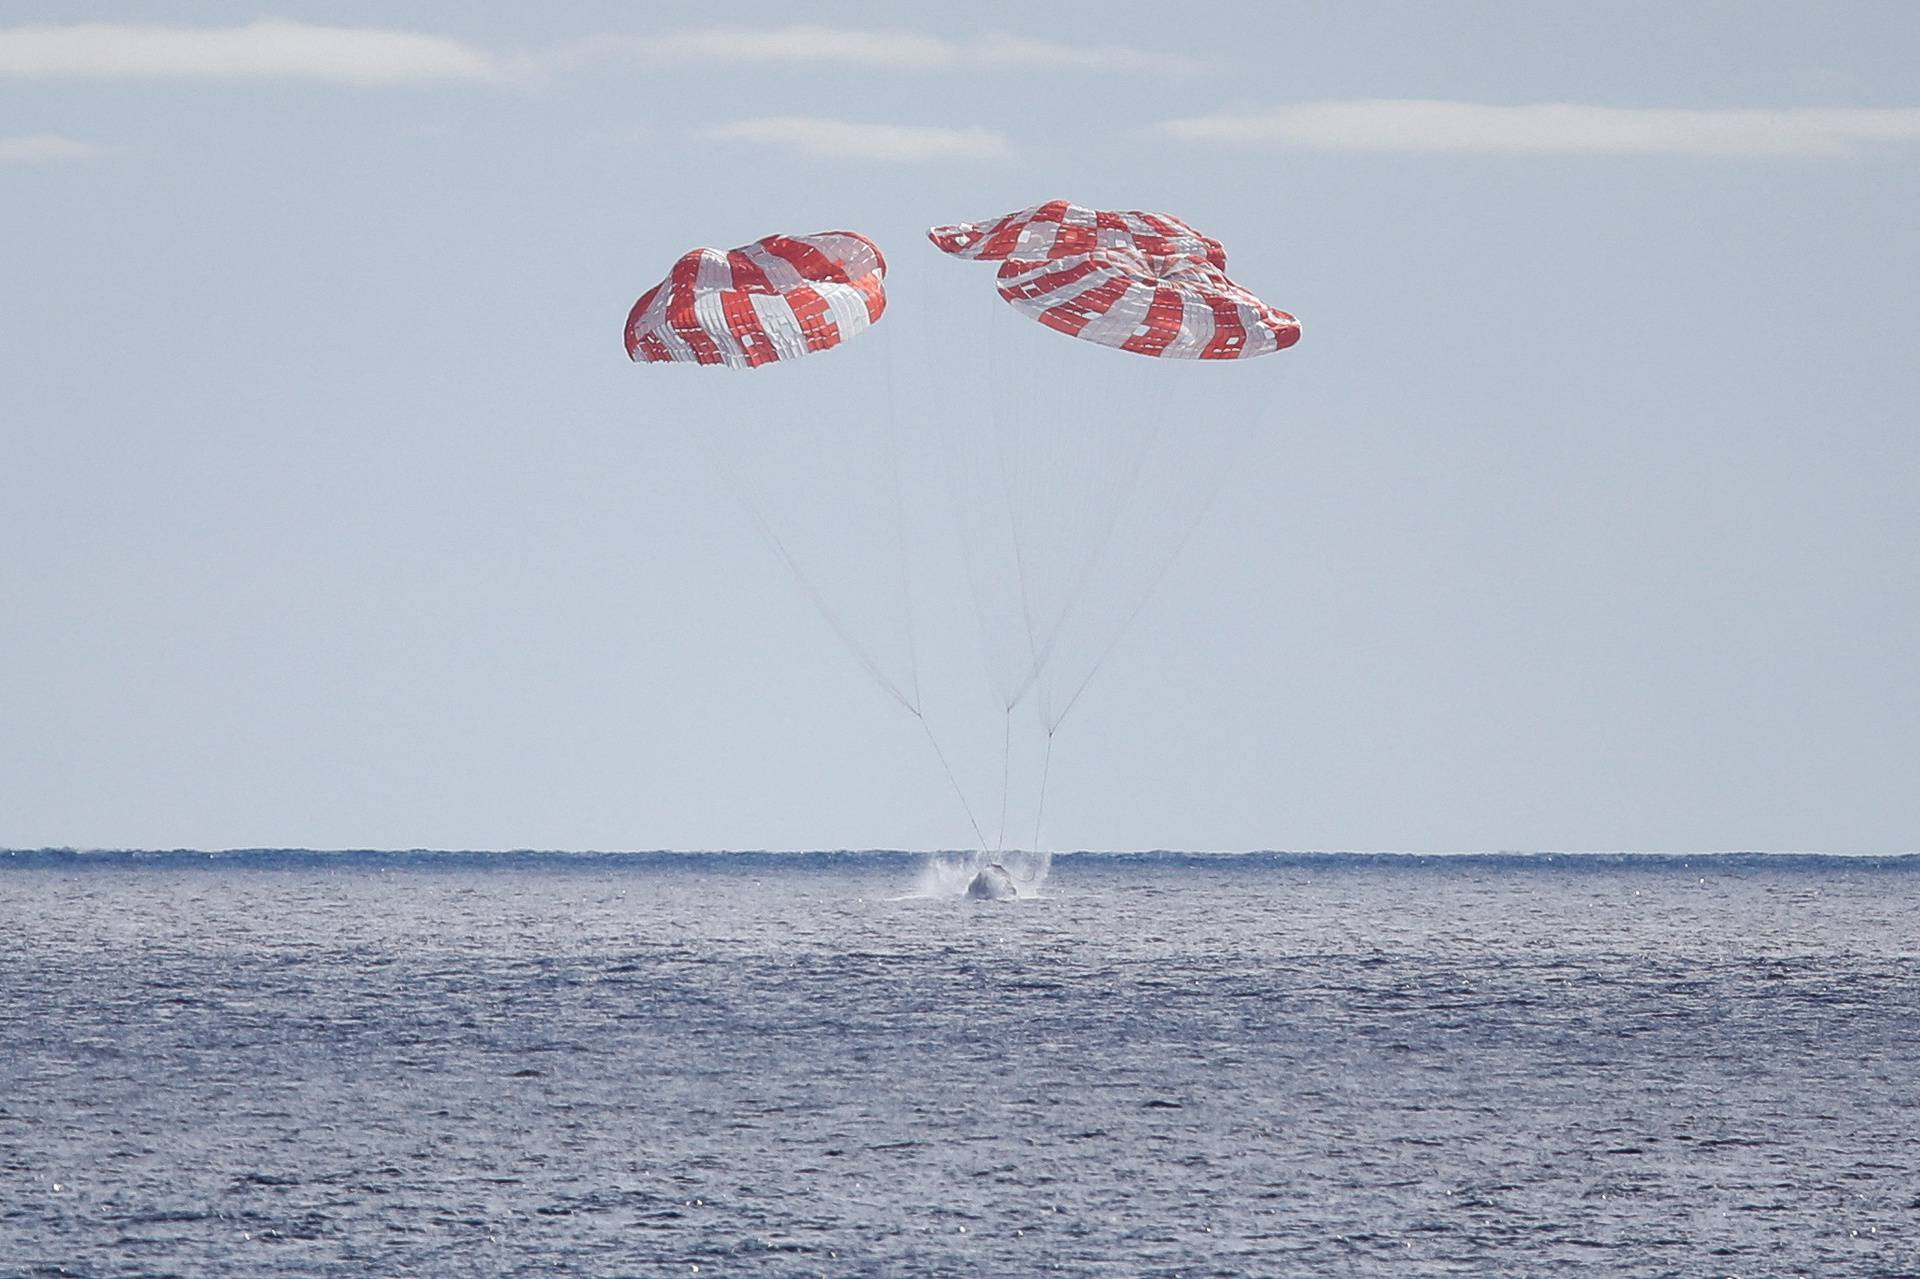 NASA's Orion space capsule heads for splashdown after Artemis I flight around moon